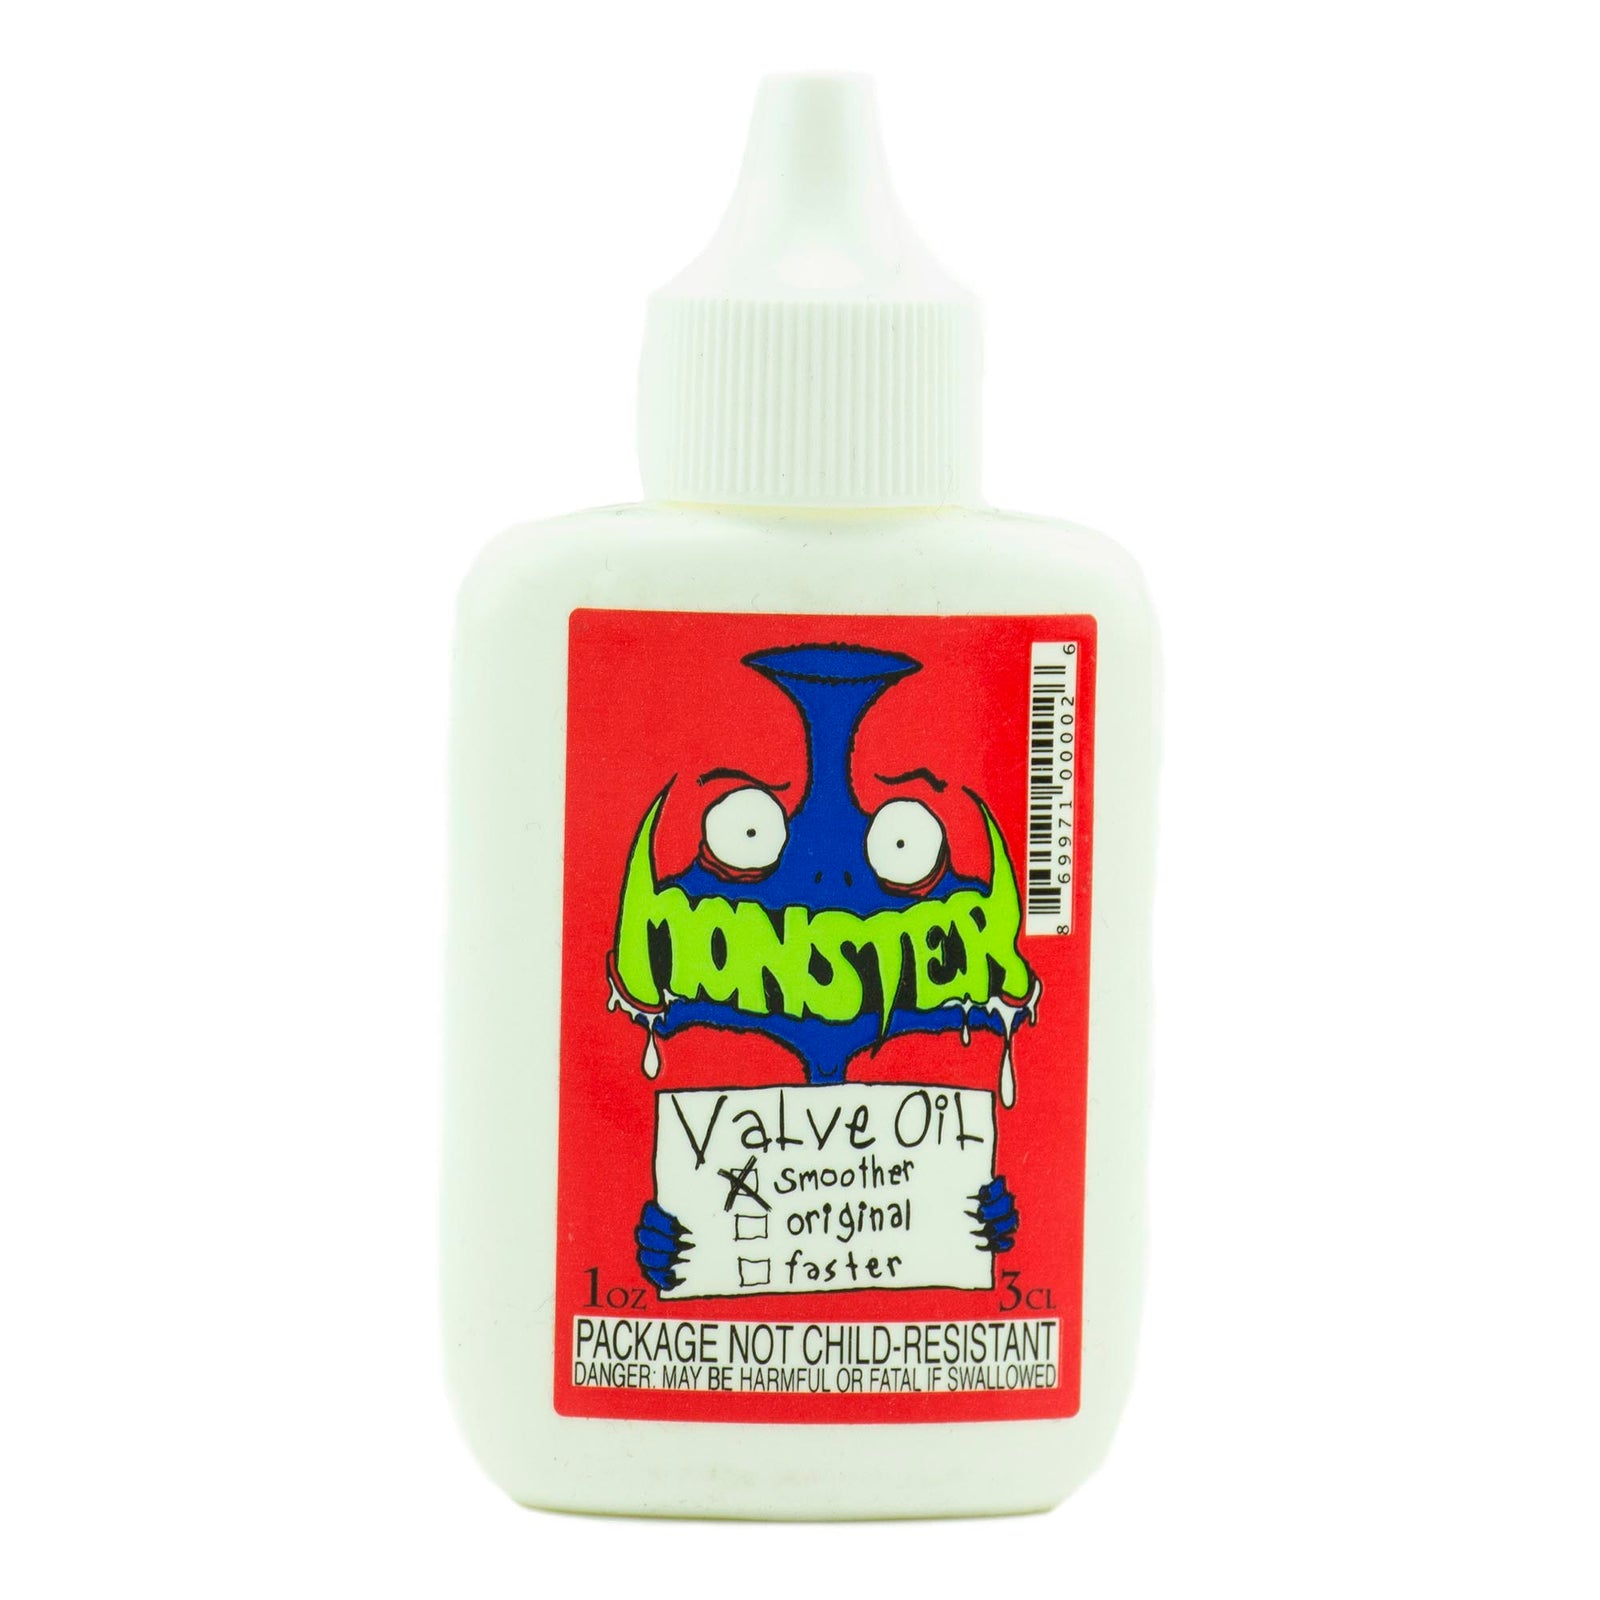 Monster Oil Synthetic Valve Oil - Smoother